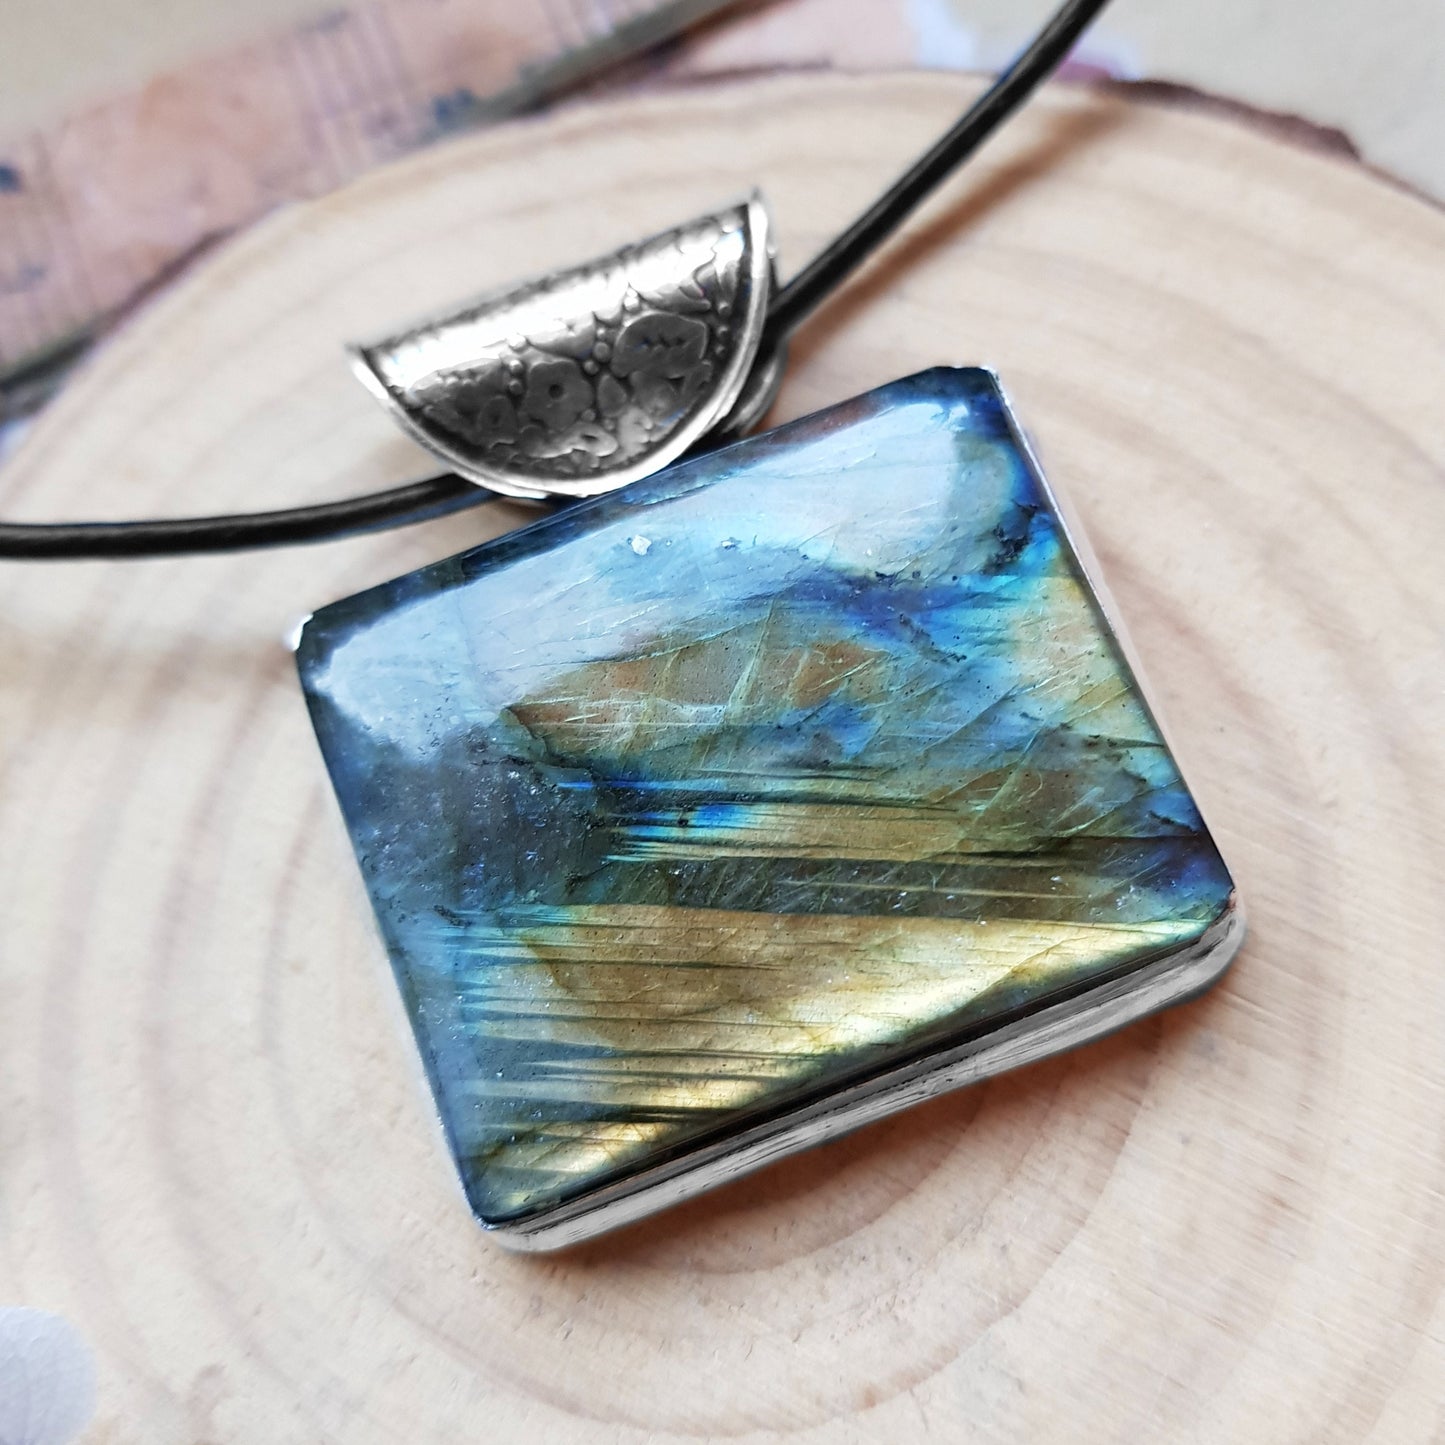 Top Grade Natural Labradorite Necklace In Sterling Silver Gemstone Pendant Boho Necklace Unique Gift One Of A Kind Jewelry